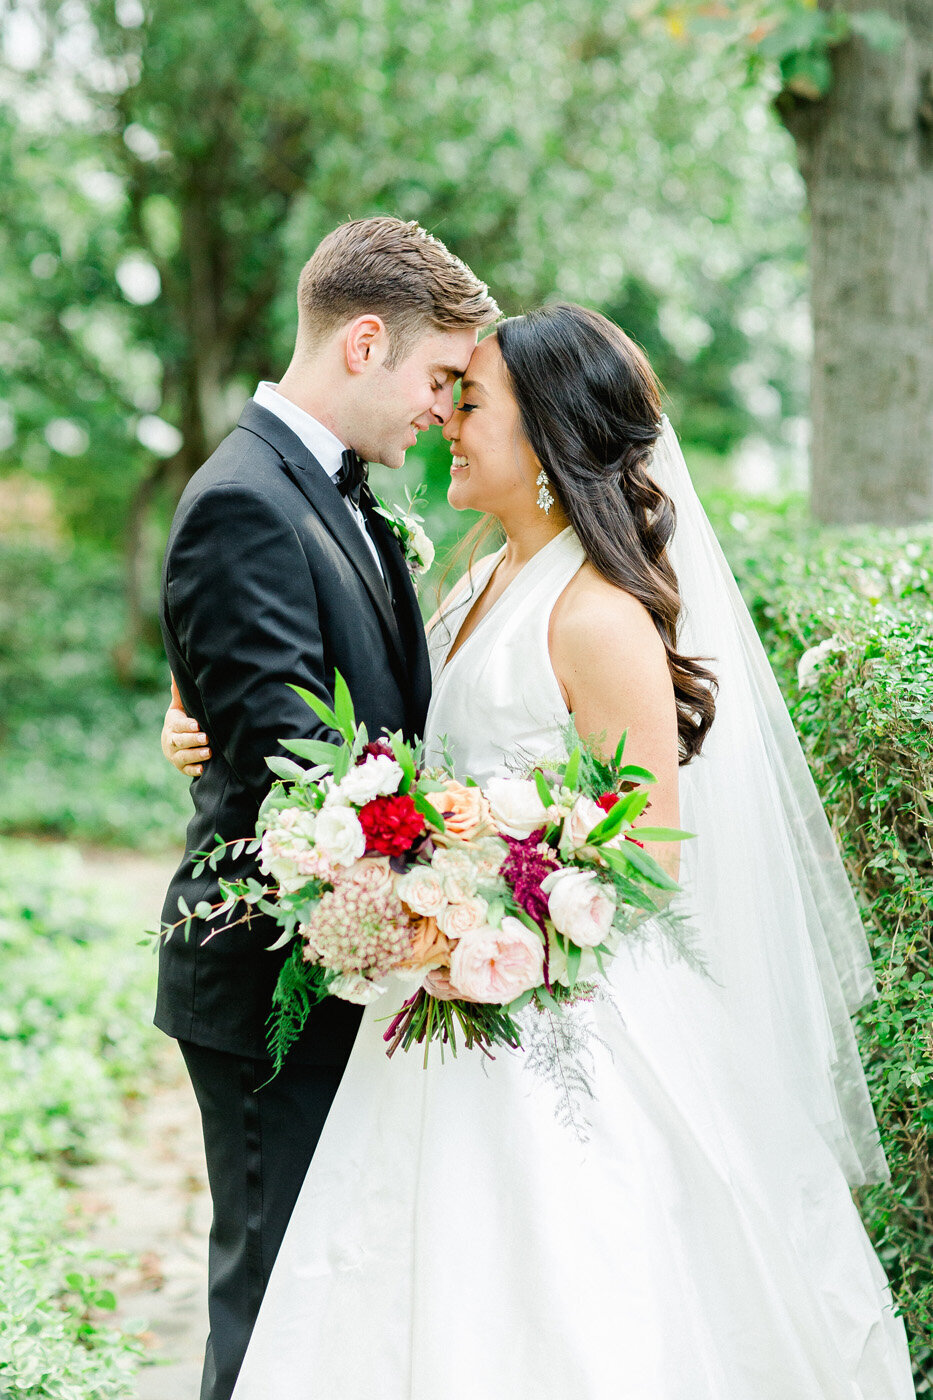 Meridian House Wedding DC @ Ailyn La Torre Photography 2018 12934A